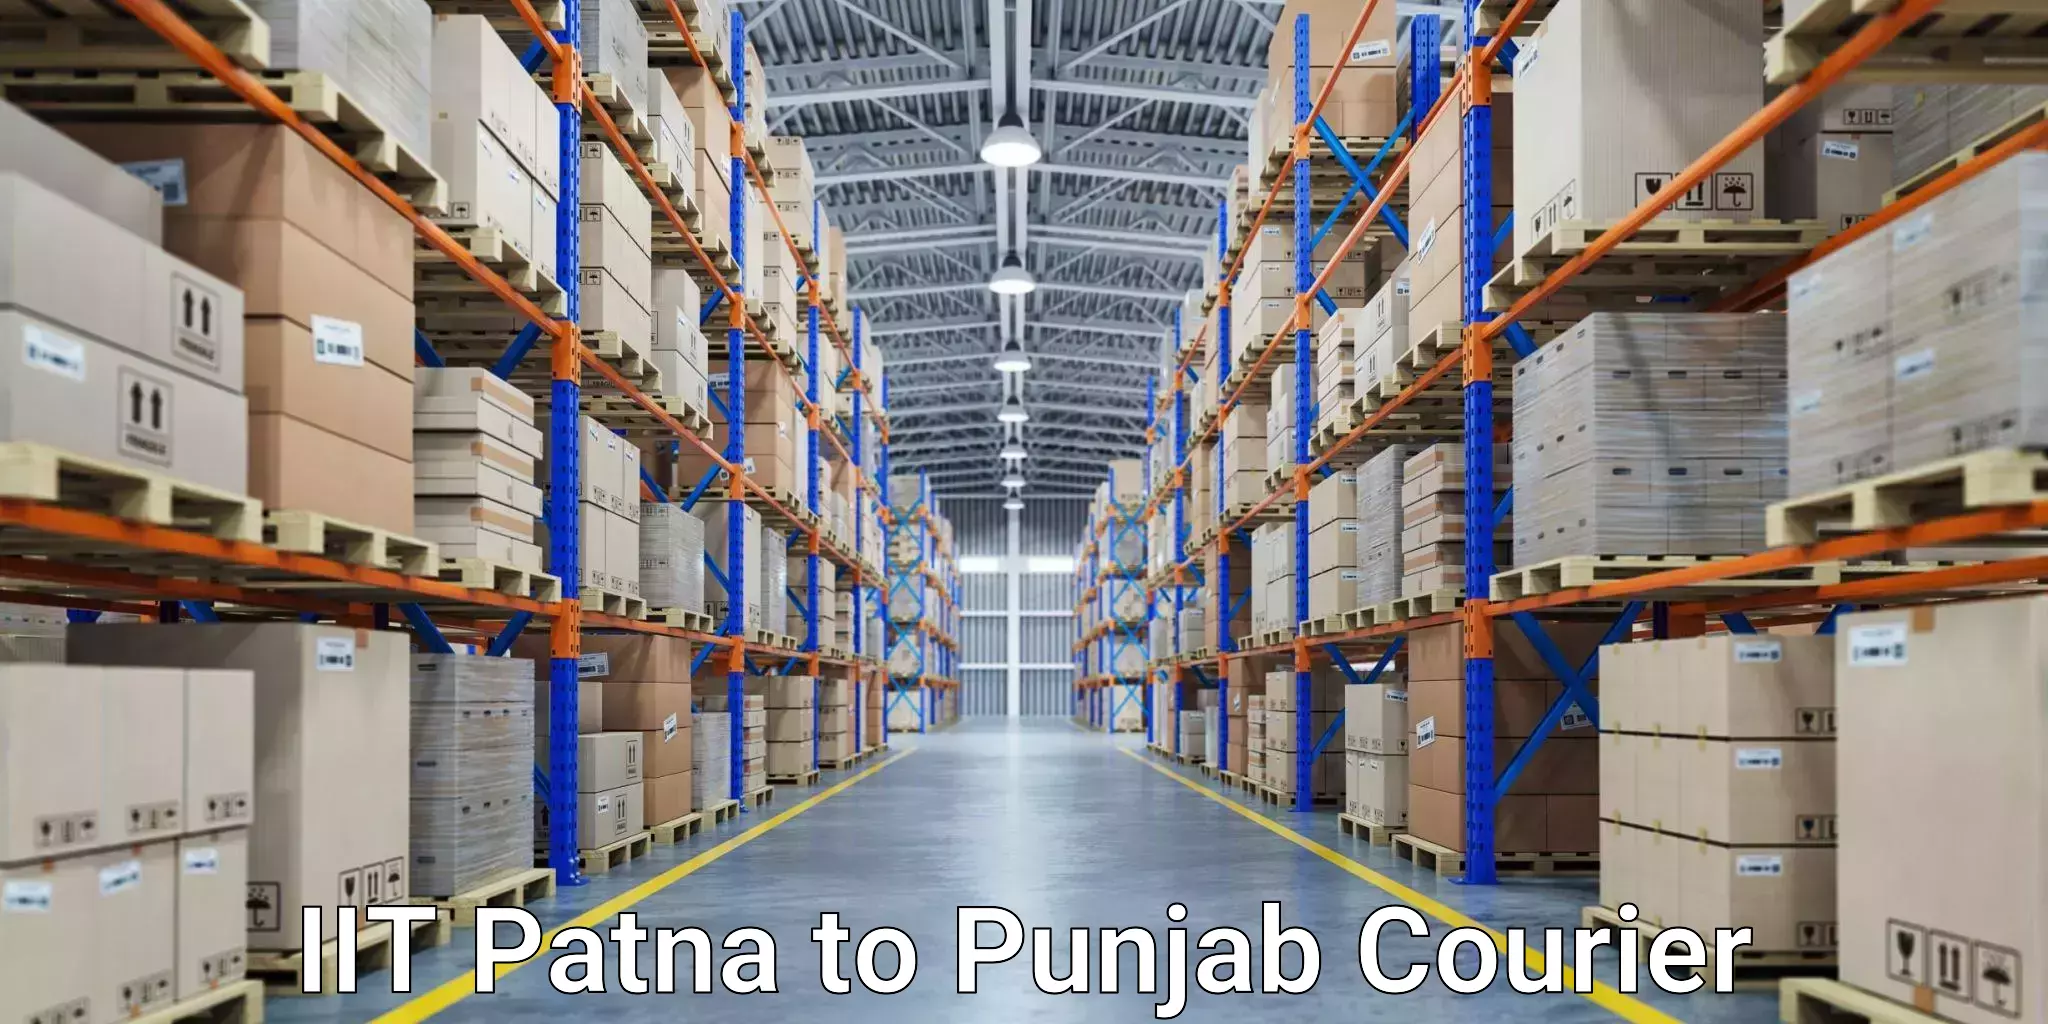 Courier services IIT Patna to Punjab